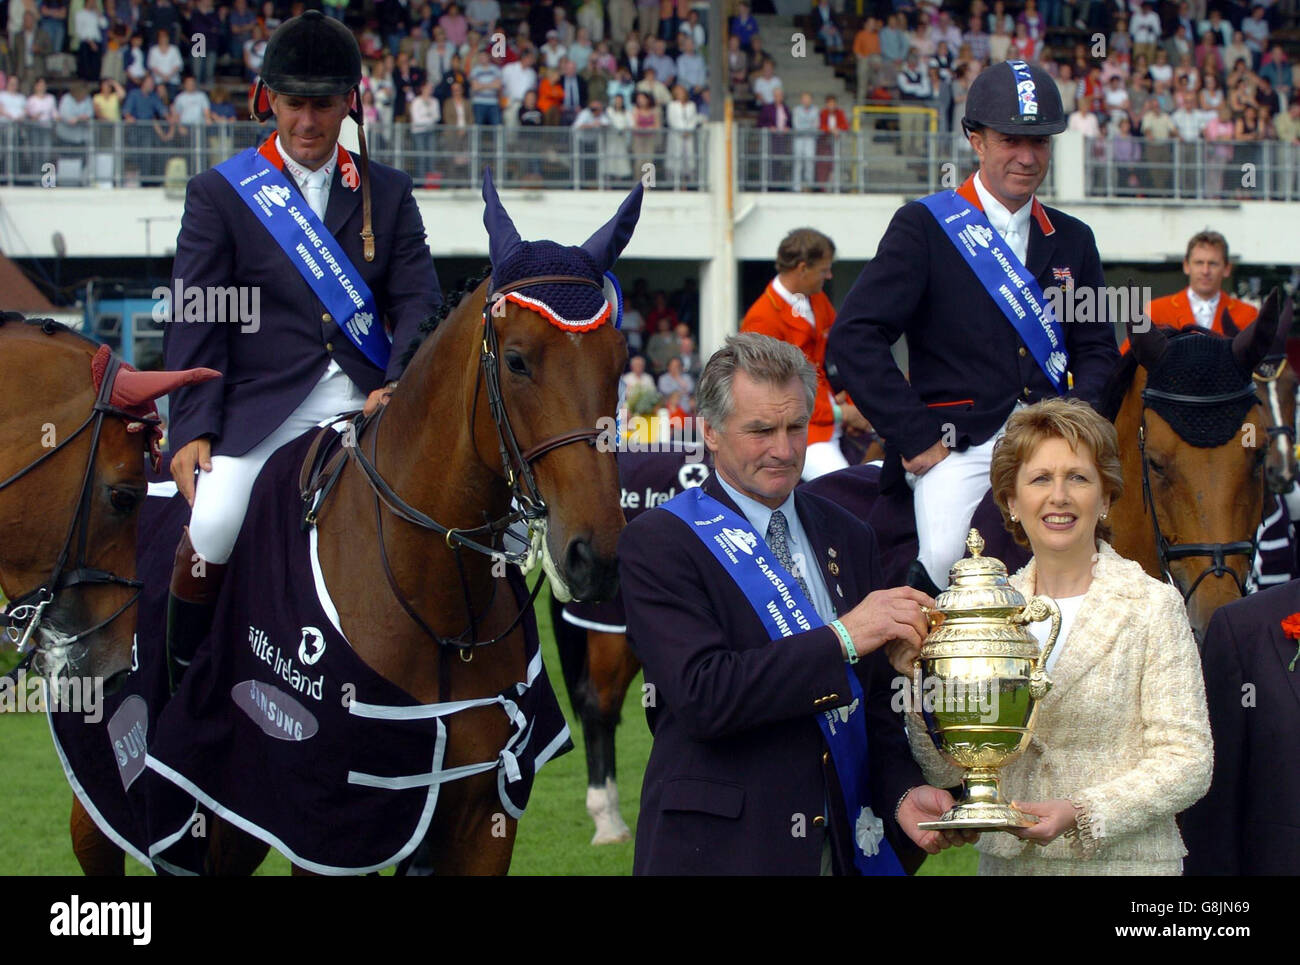 Great Britain's Chef d'Equipe, Derek Ricketts accepts the Aga Khan Challenge Trophy from President Mary McAleese as riders William Funnel on Cortaflex Mondriaan (left) and Michael Whitaker on Portofino 63 (right) look on at the Failte Ireland Dublin Horse Show, Friday August 5 2005, at the Royal Dublin Society Arena, Dublin. Stock Photo